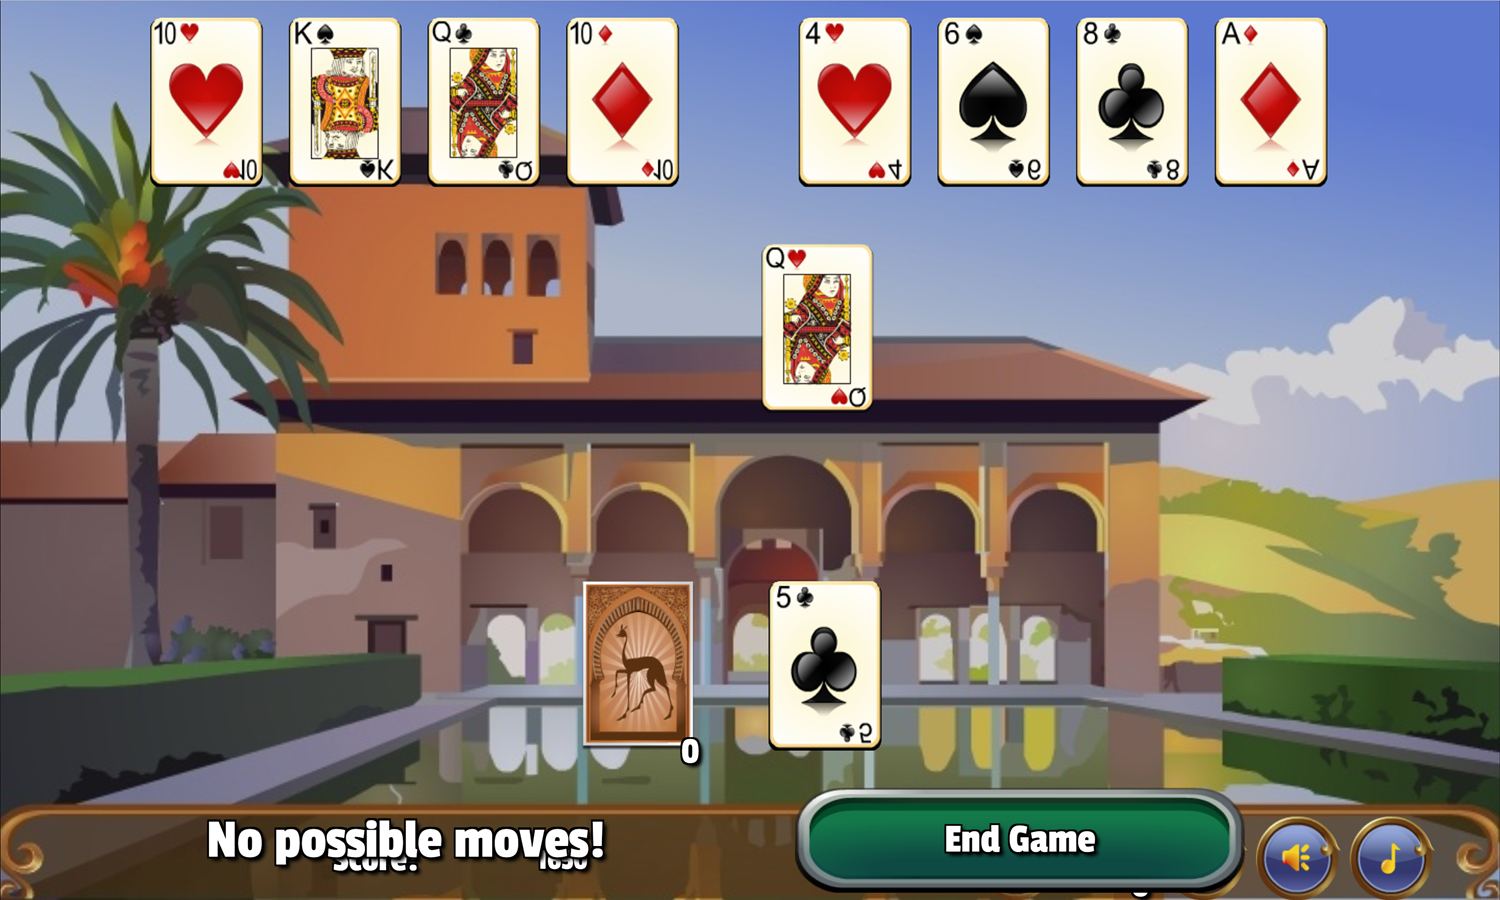 Alhambra Solitaire Game No Possible Moves Screen Screenshot.